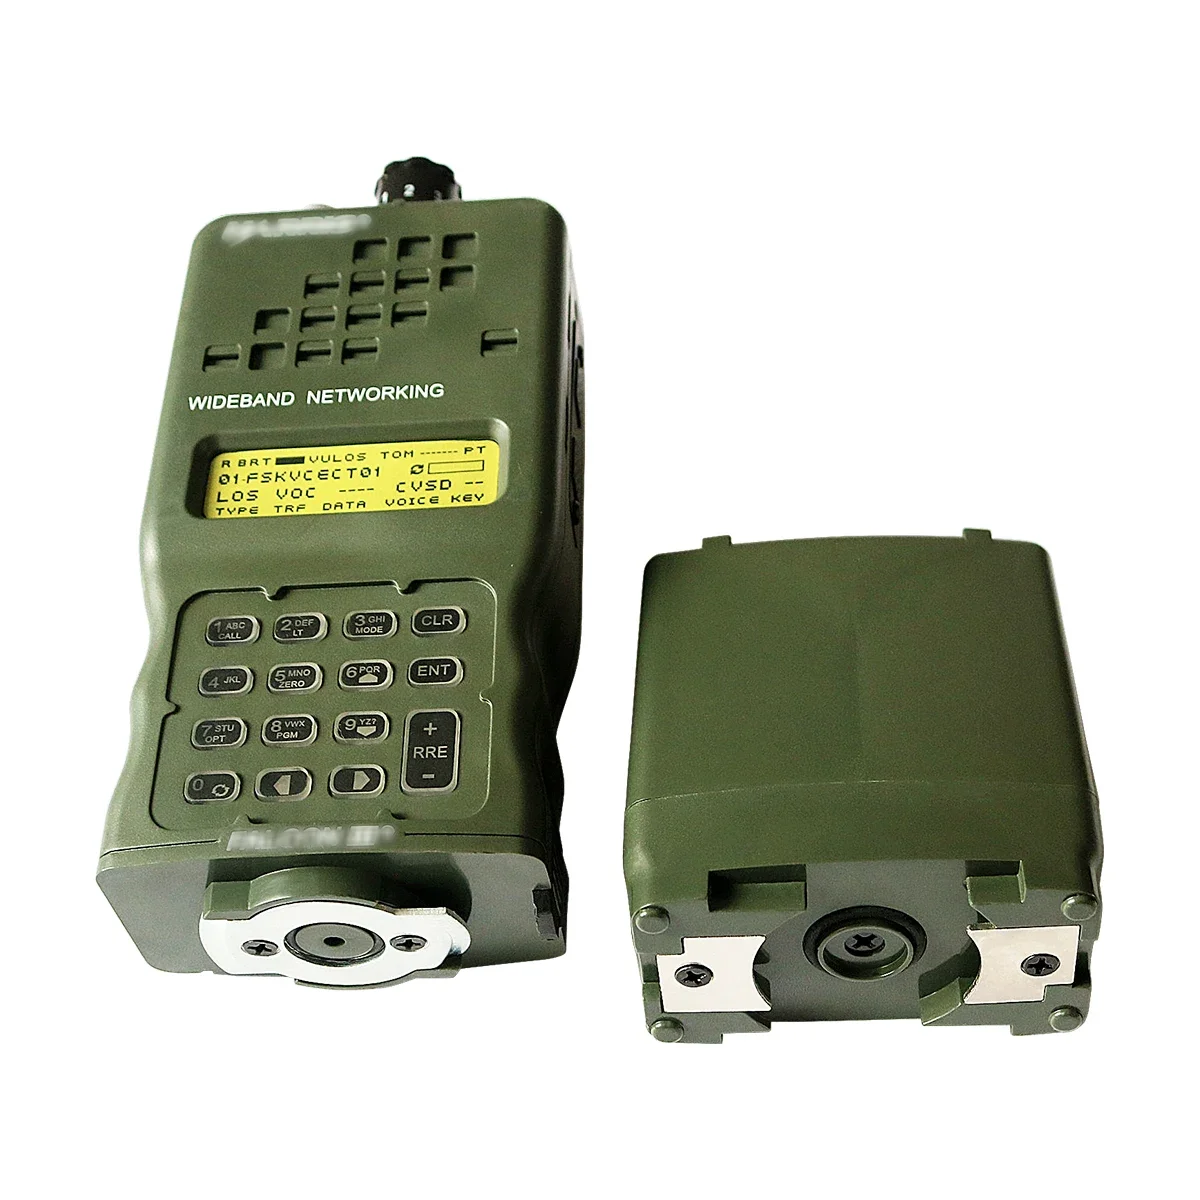 

HEARING TACTICAL Tactical AN / PRC 152 Harris Military Radio Ommunication Case Model Virtual PRC 152 for Tactical 6pin Ptt